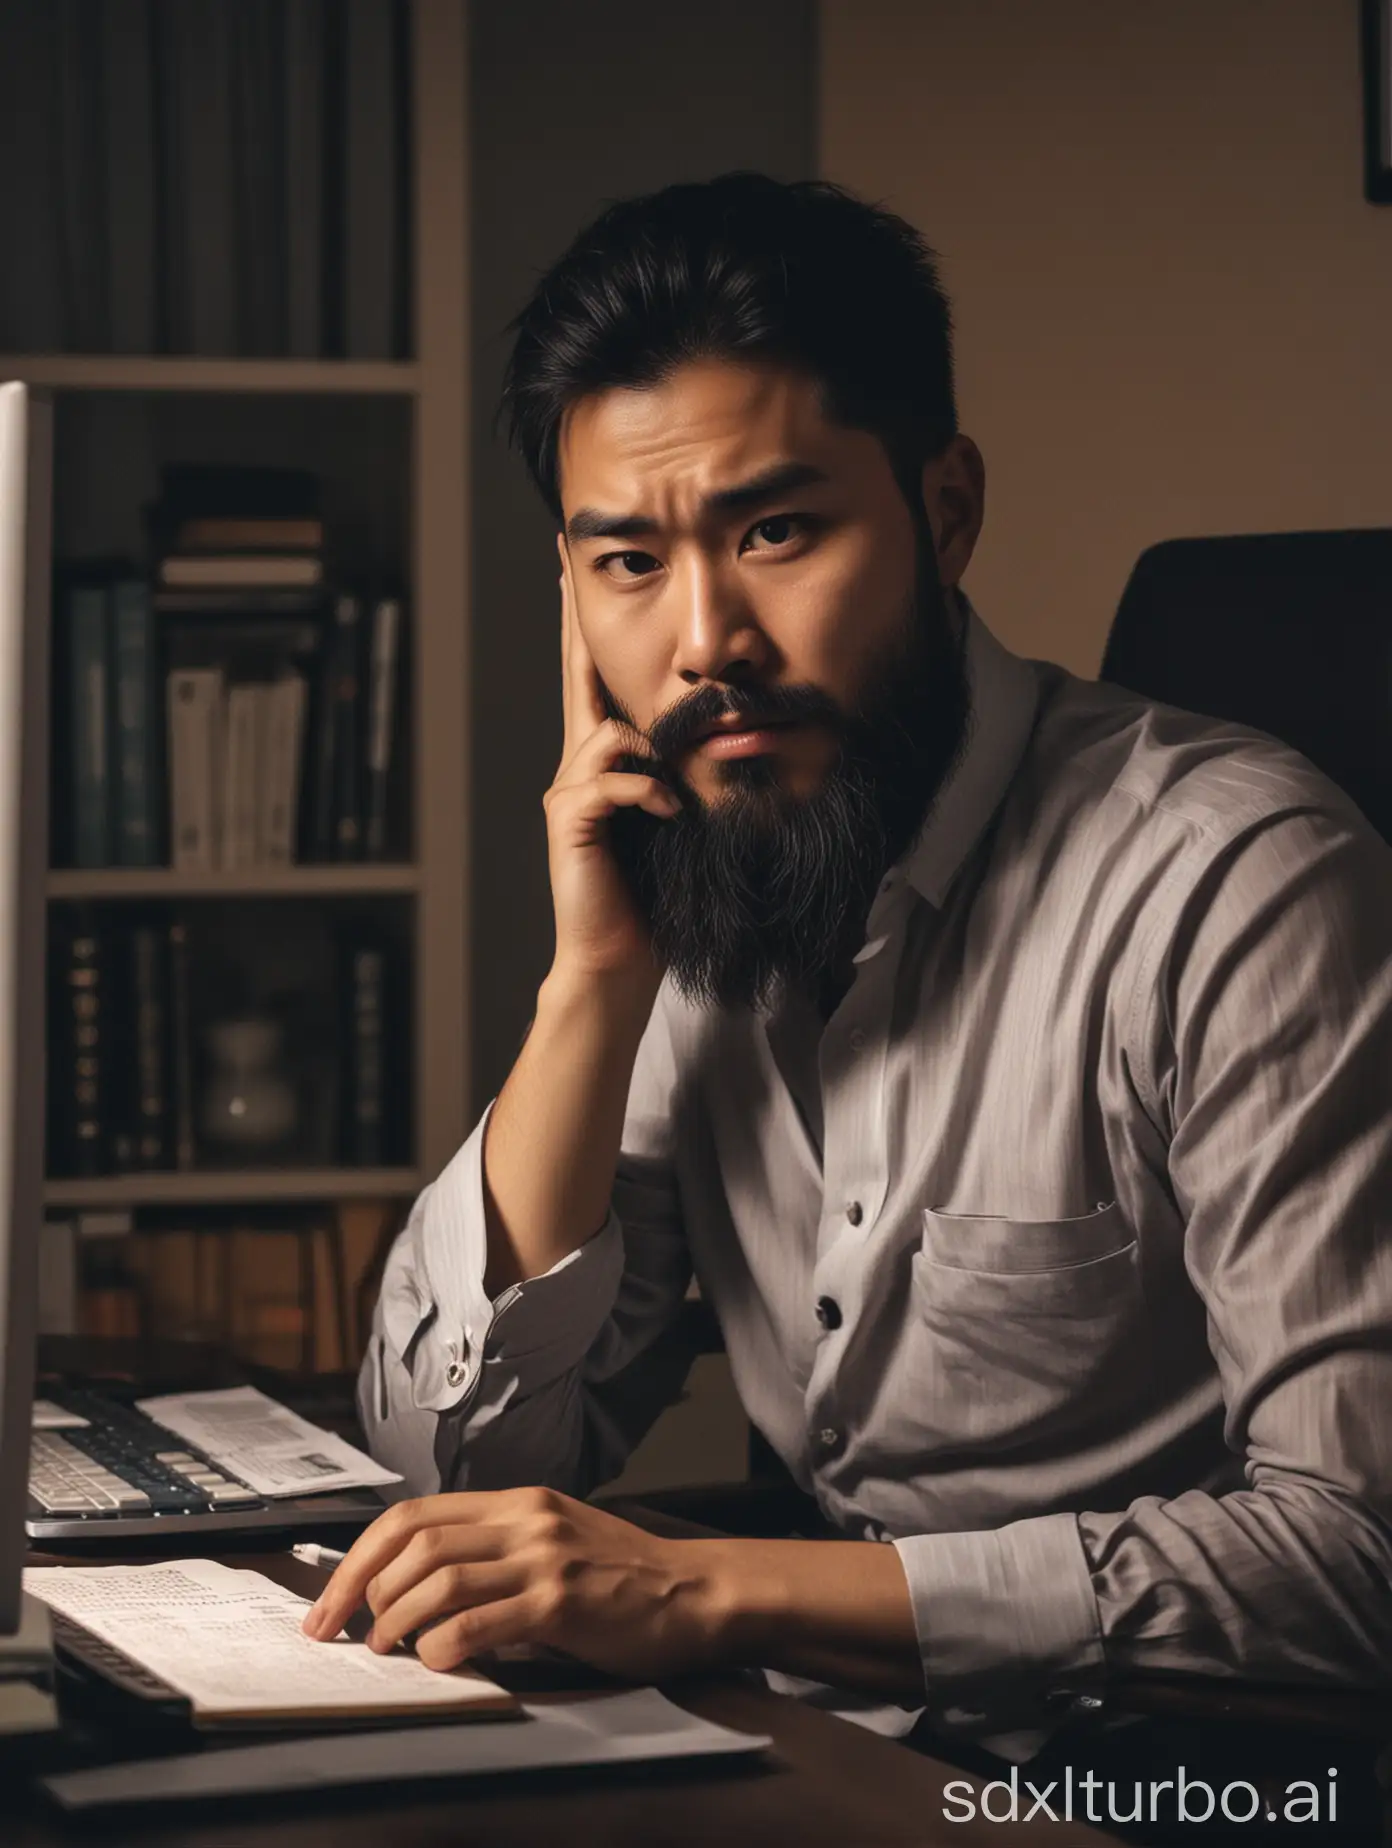 Extremely exhausted, in the study, decadent, beard, Asian, in front of the computer, sitting, at night